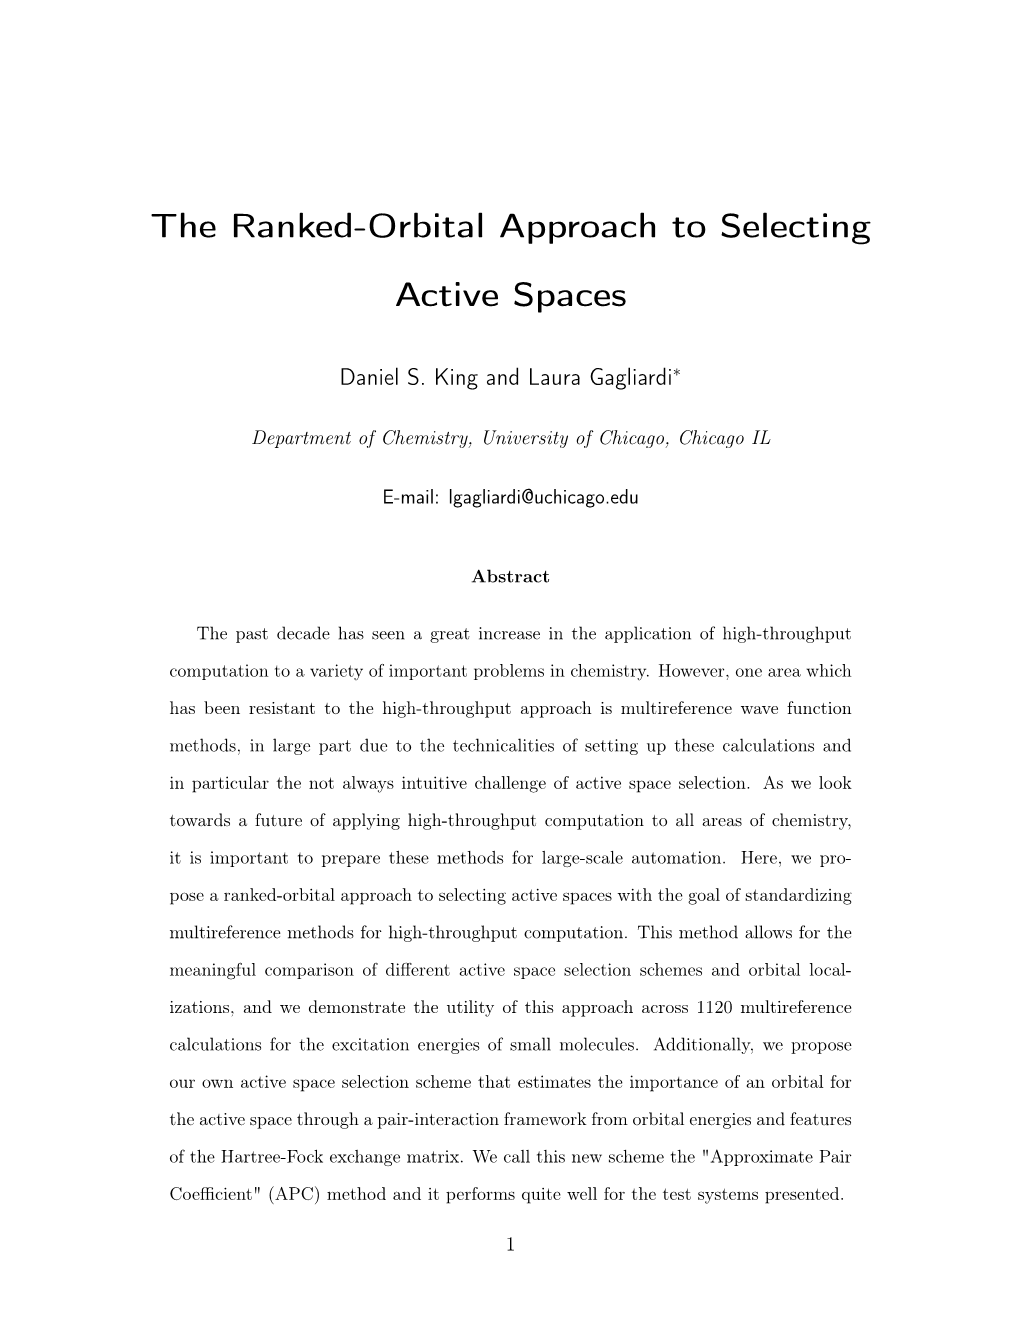 The Ranked-Orbital Approach to Selecting Active Spaces